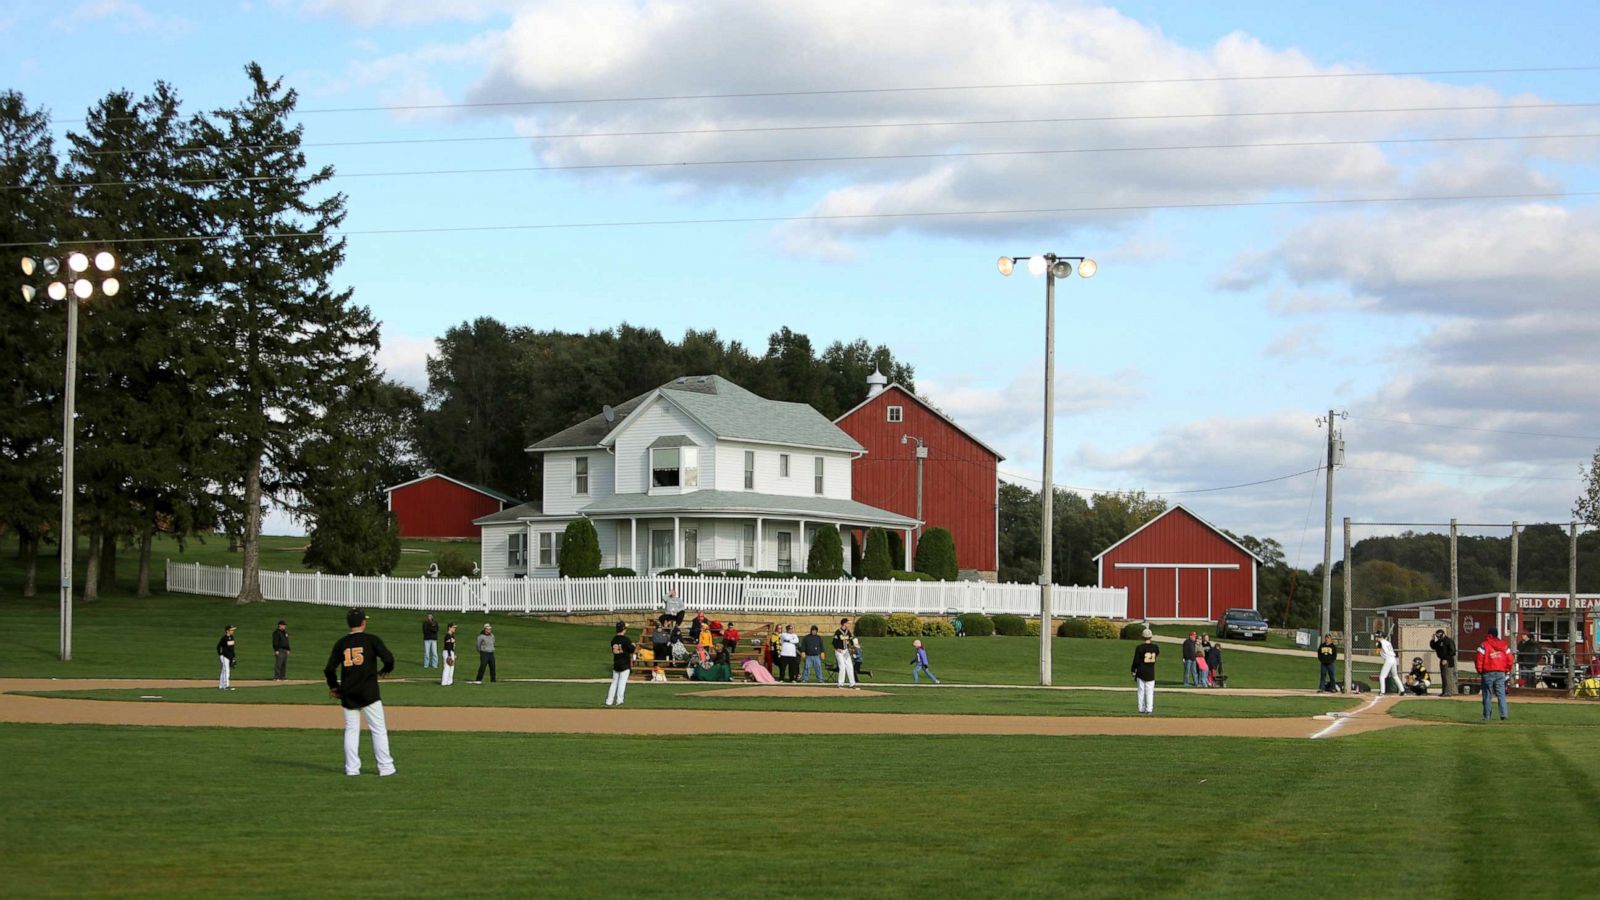 How to watch the MLB 'Field of Dreams' game between Yankees, White